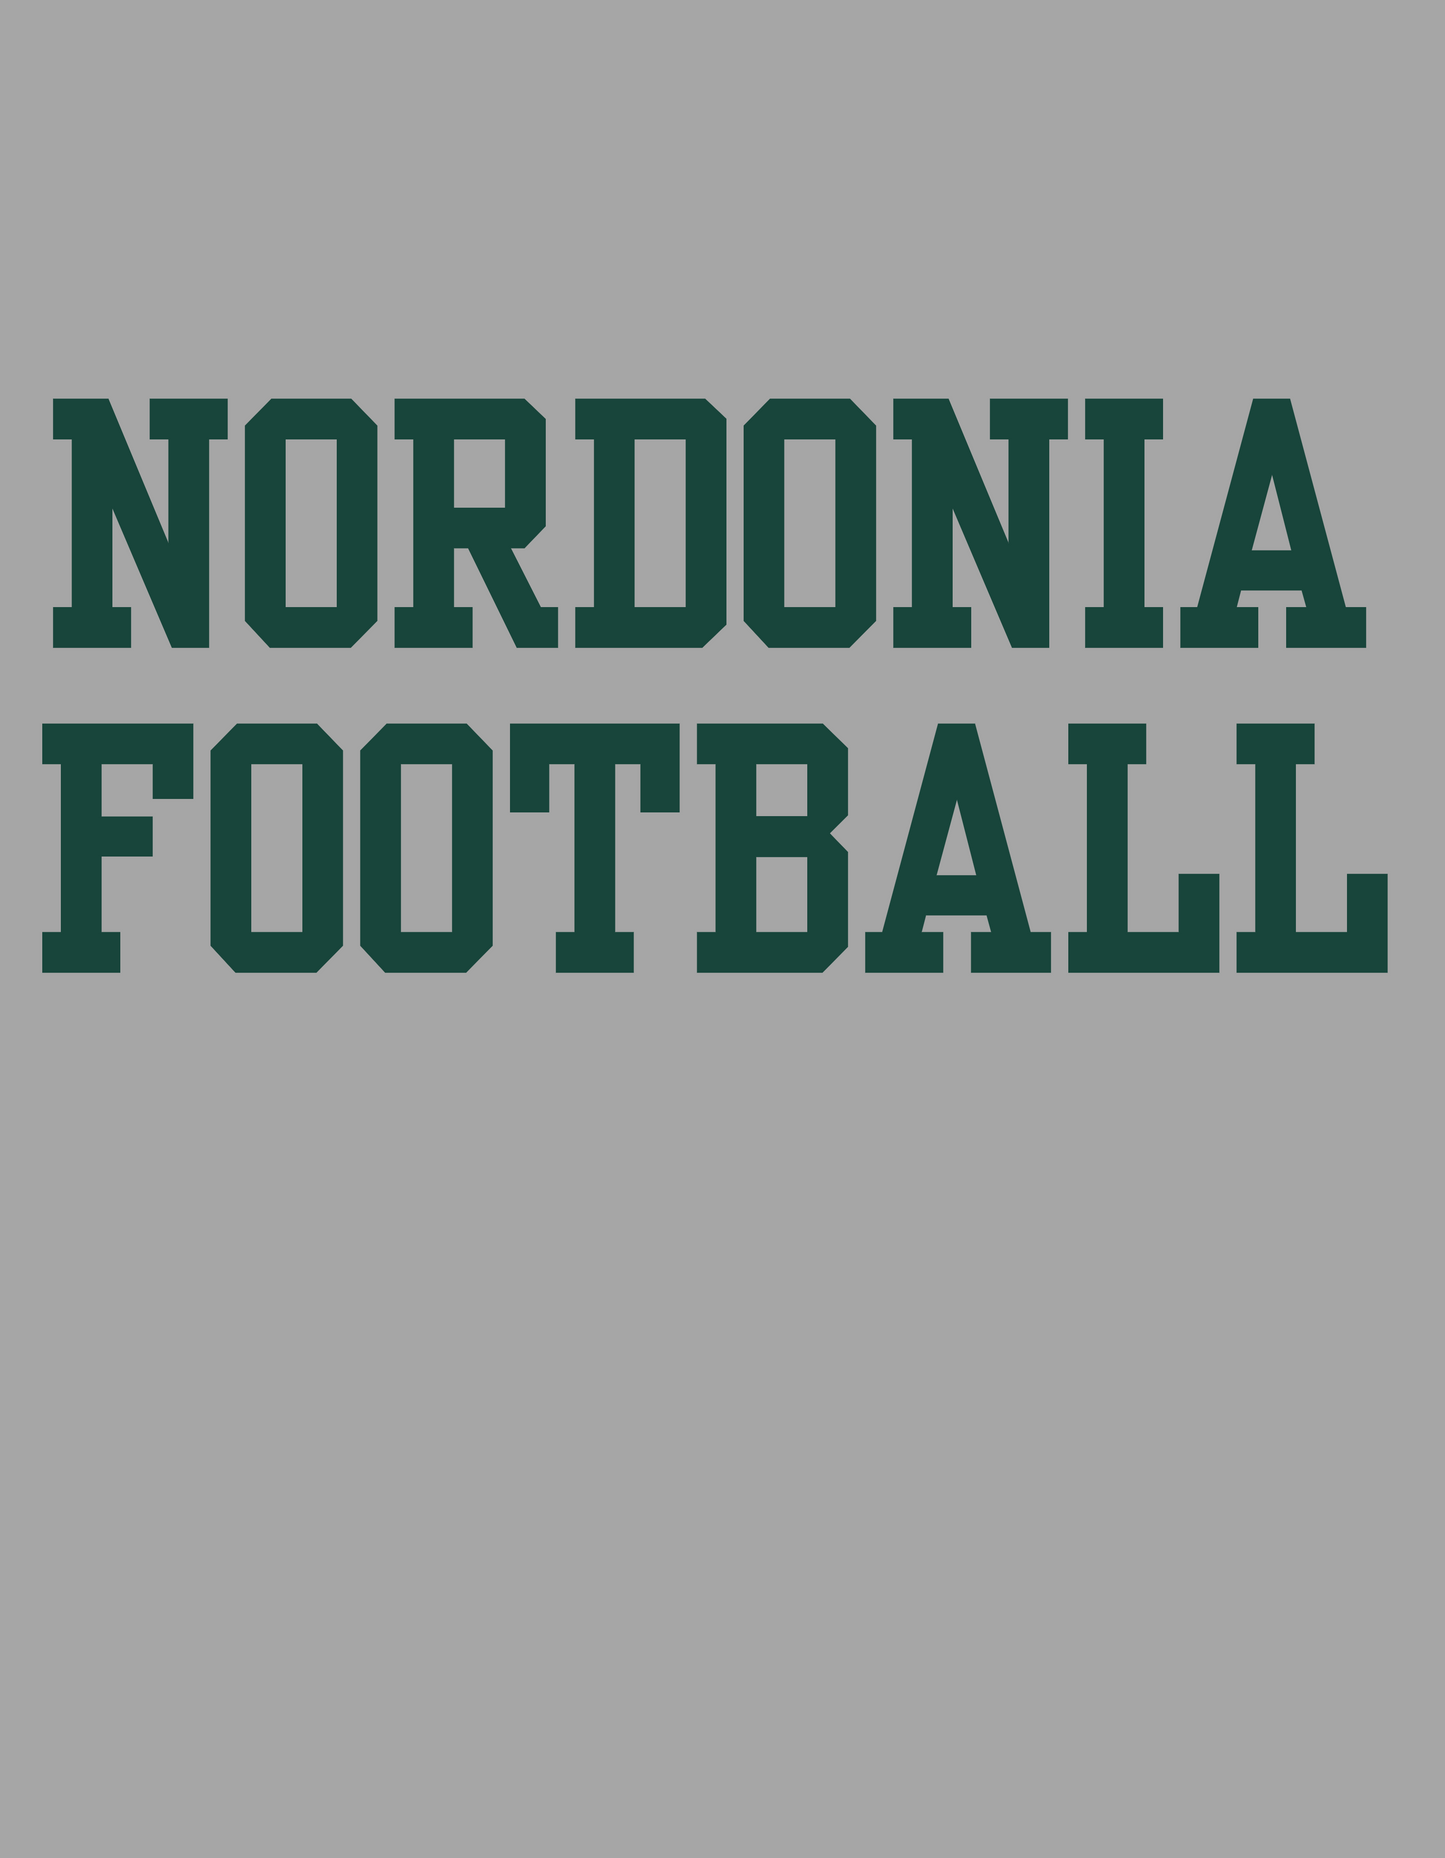 Adult Unisex Team Football Classic Graphic Hoodie - Nordonia Knights